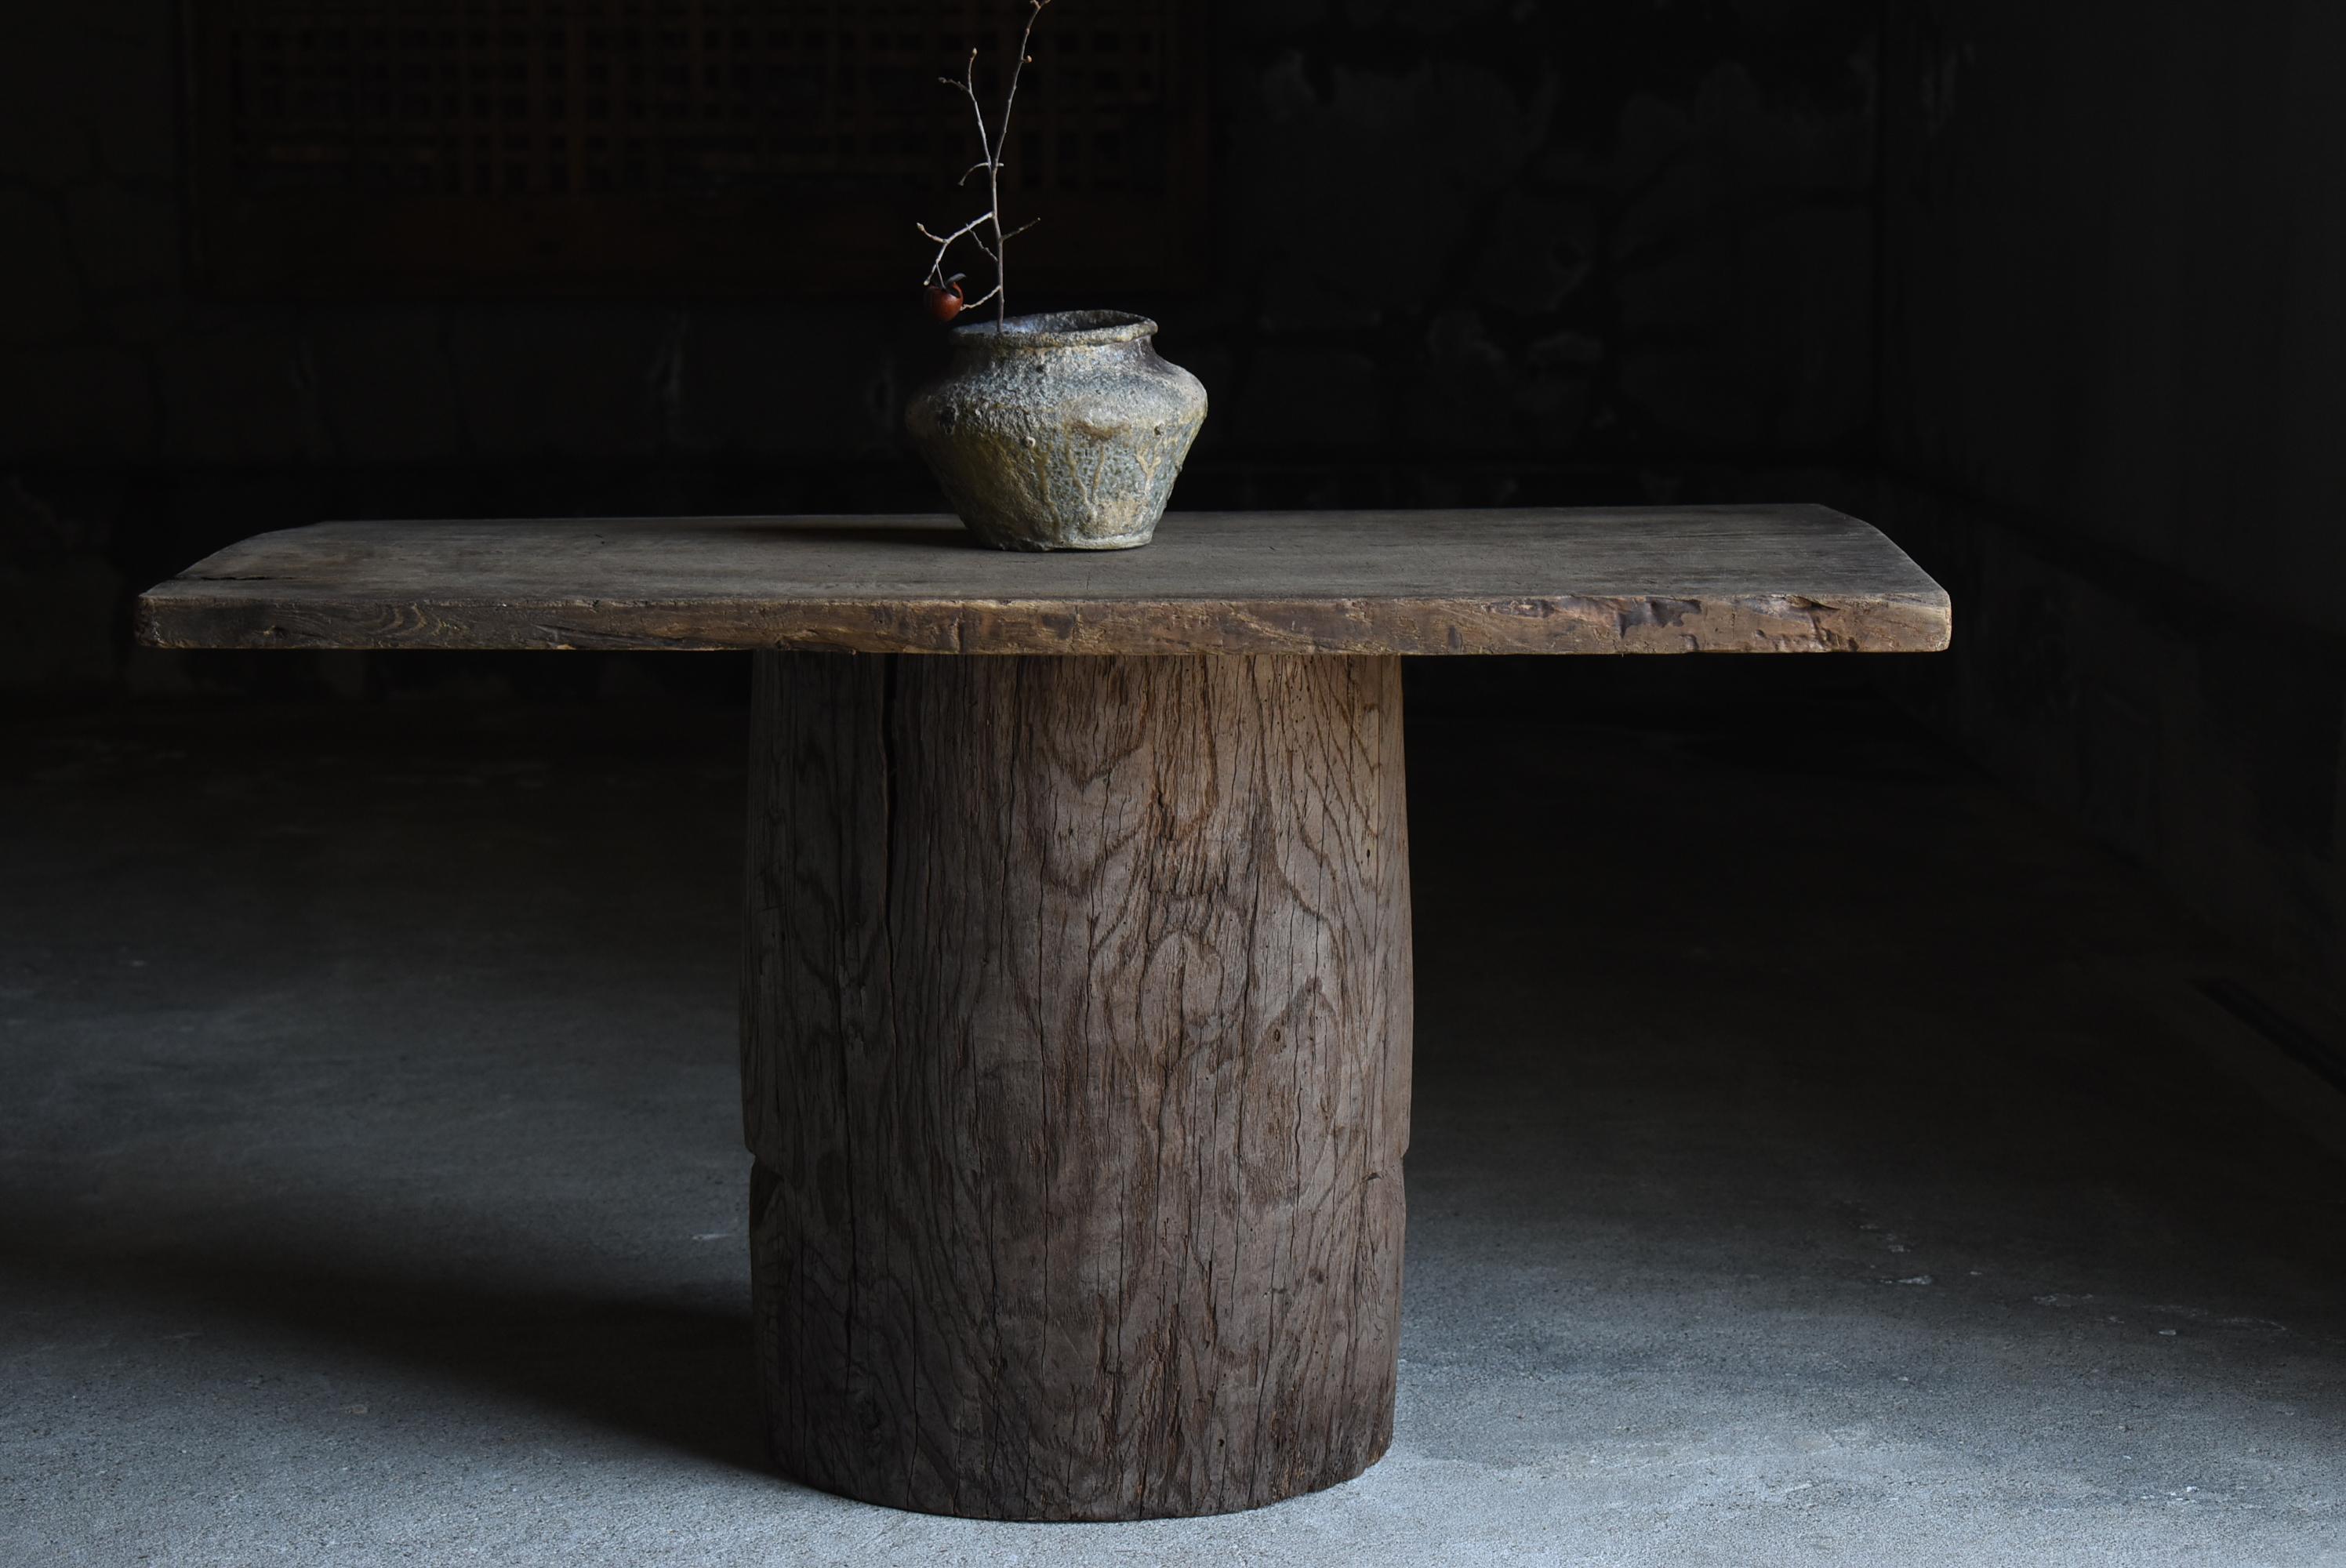 Japanese Antique Side Table 1860s-1920s / Exhibition Table Wabi Sabi 9